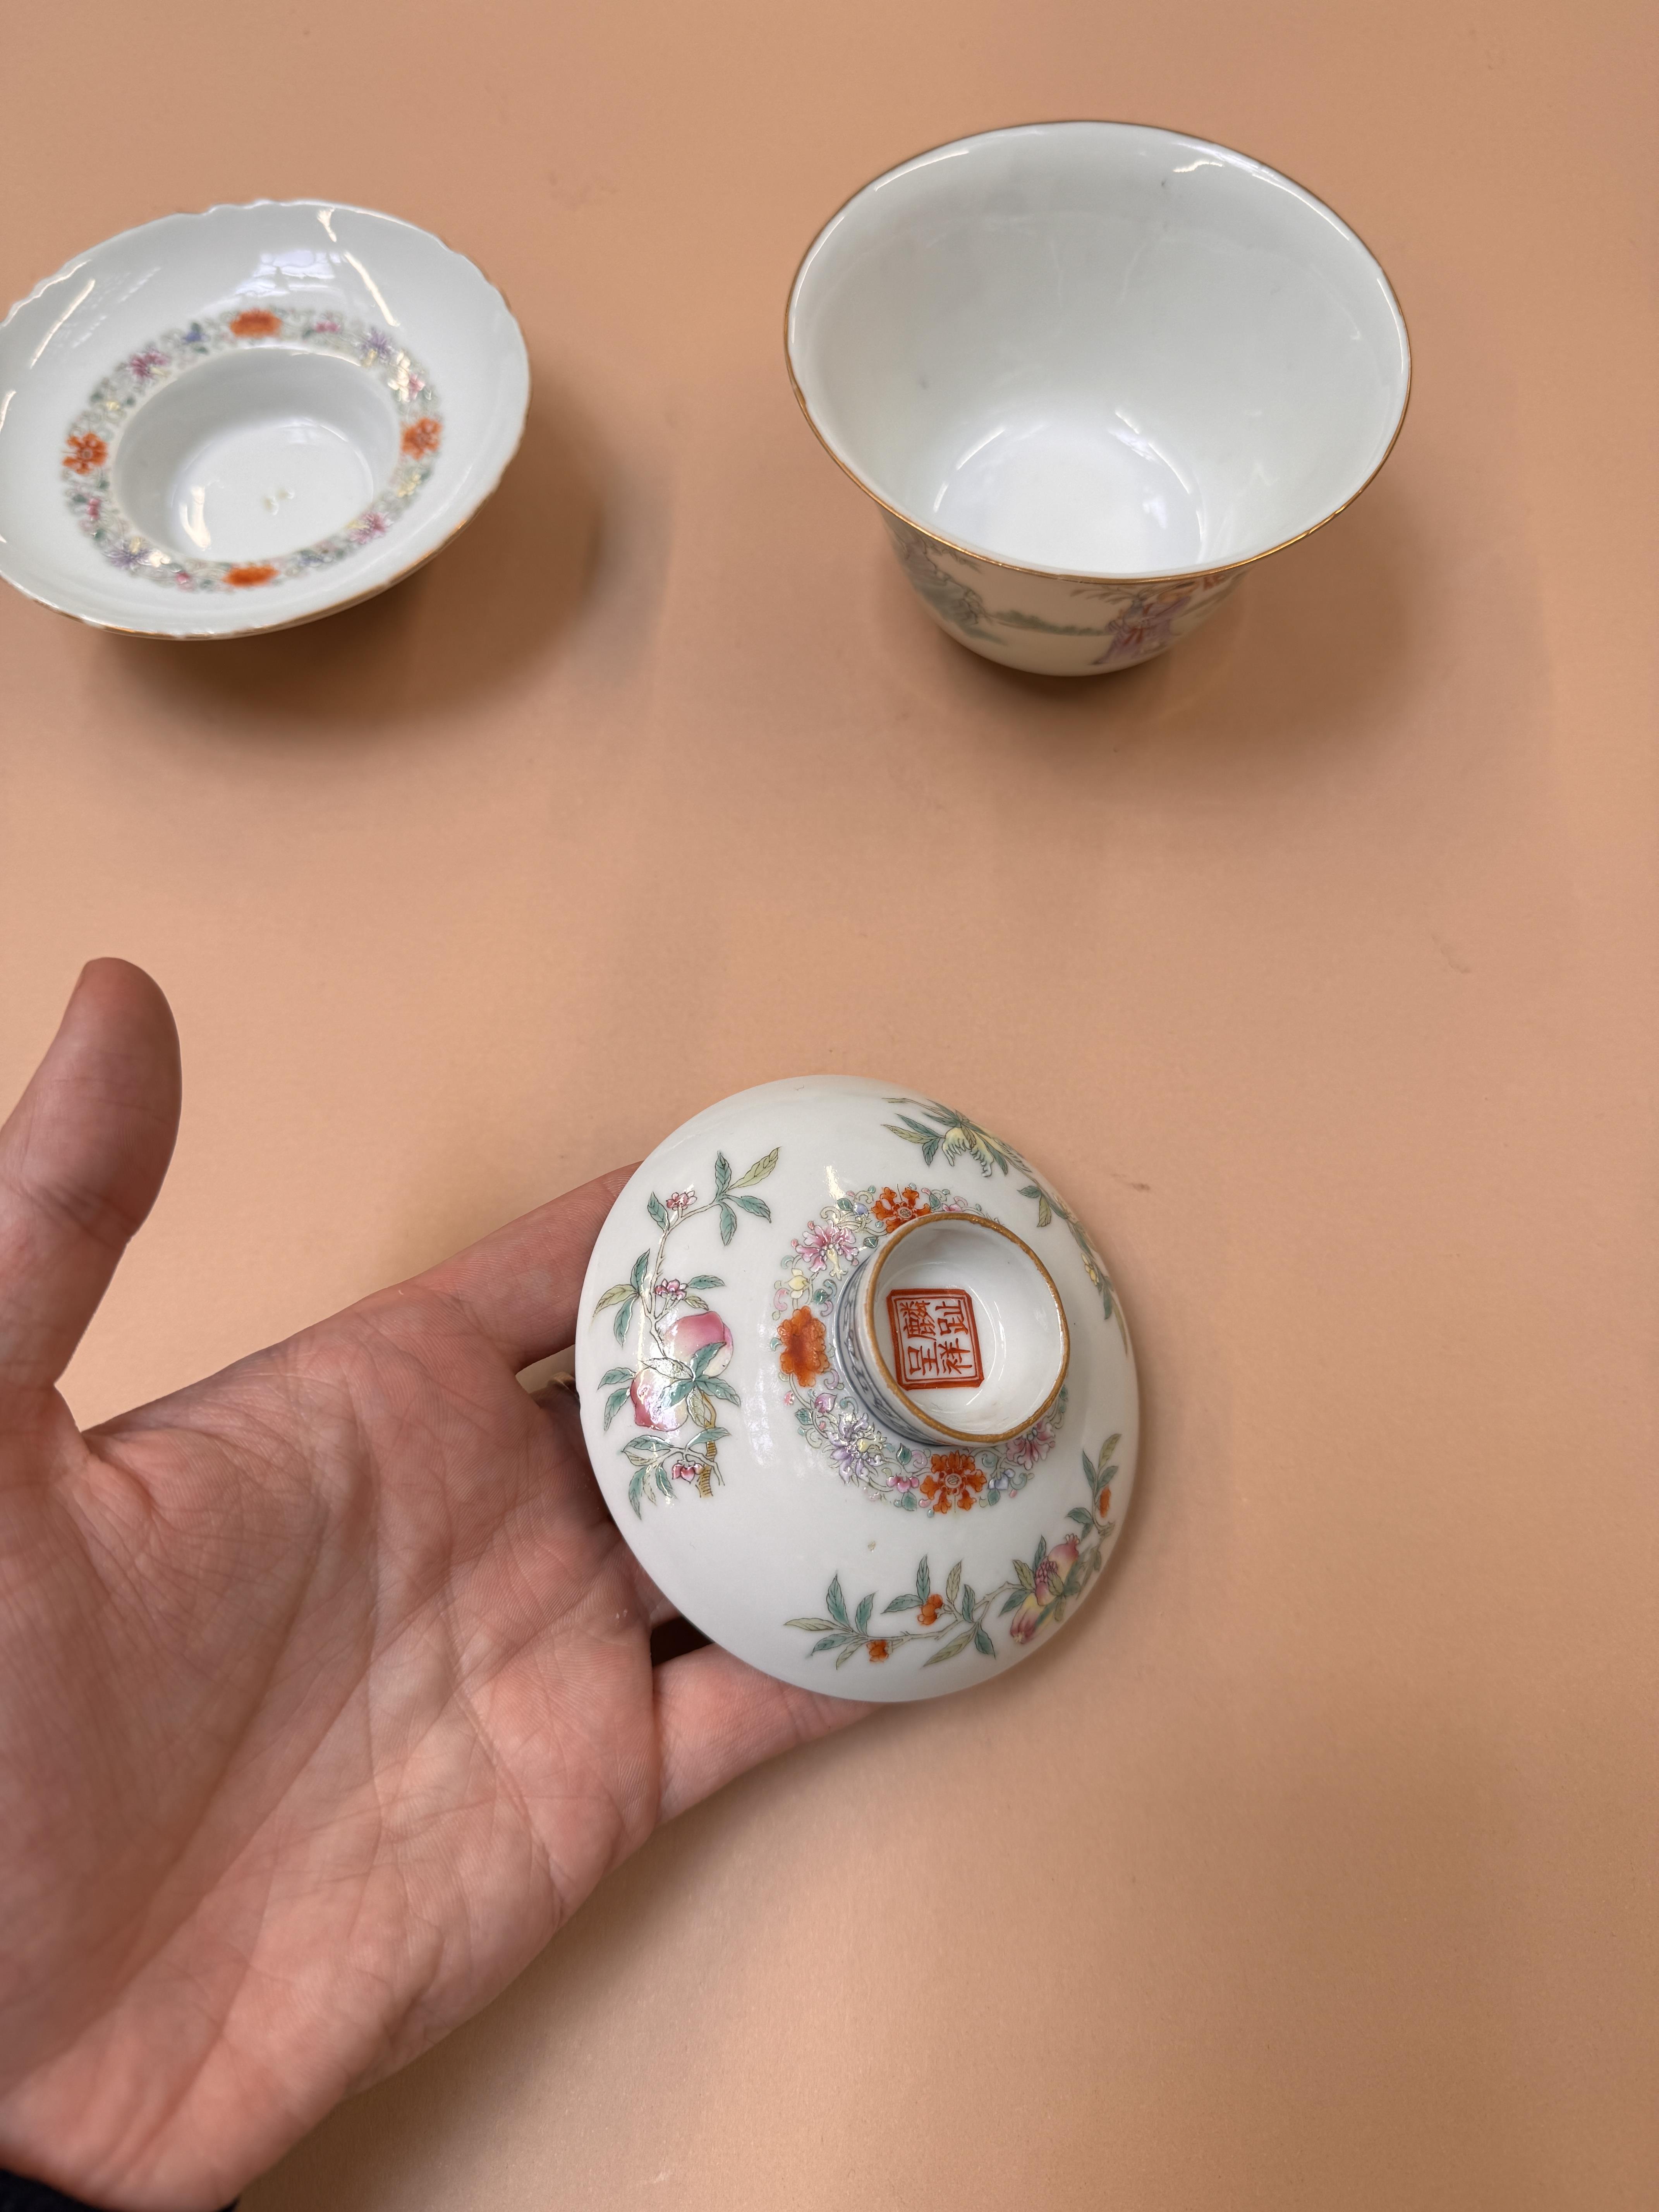 A PAIR OF CHINESE FAMILLE-ROSE CUPS, COVERS AND STANDS 民國時期 粉彩嬰戲圖蓋盌一對 《麟指呈祥》款 - Image 32 of 44